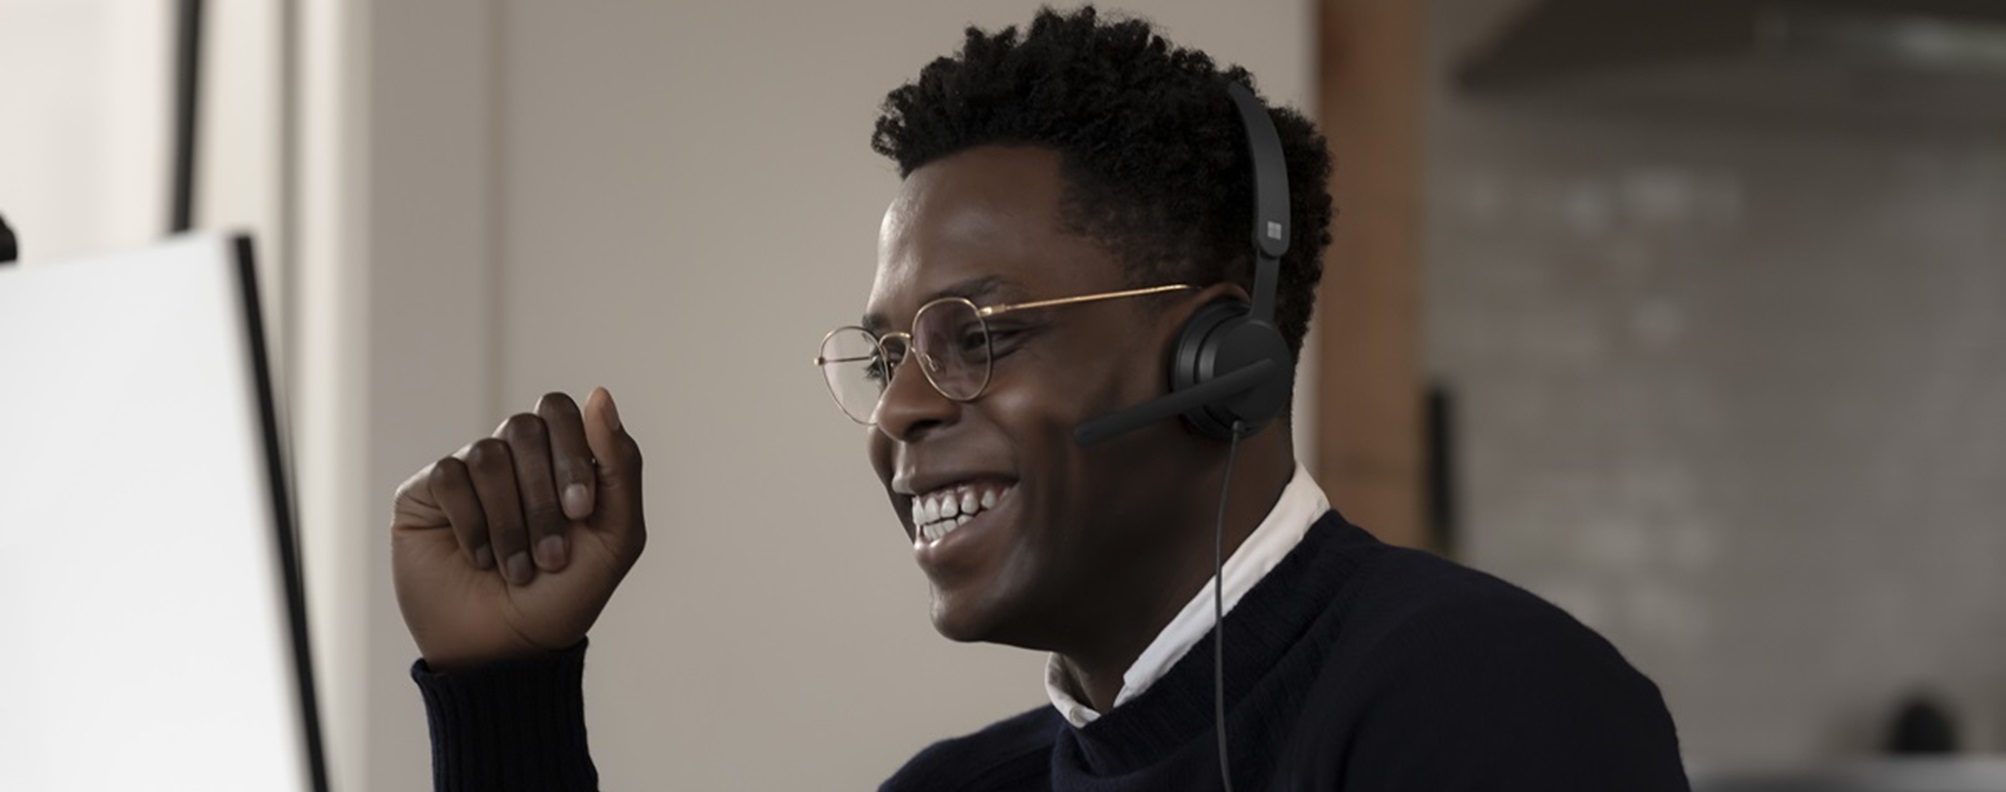 Young man wearing glasses and a headset smiling at a computer monitor with a mounted webcam